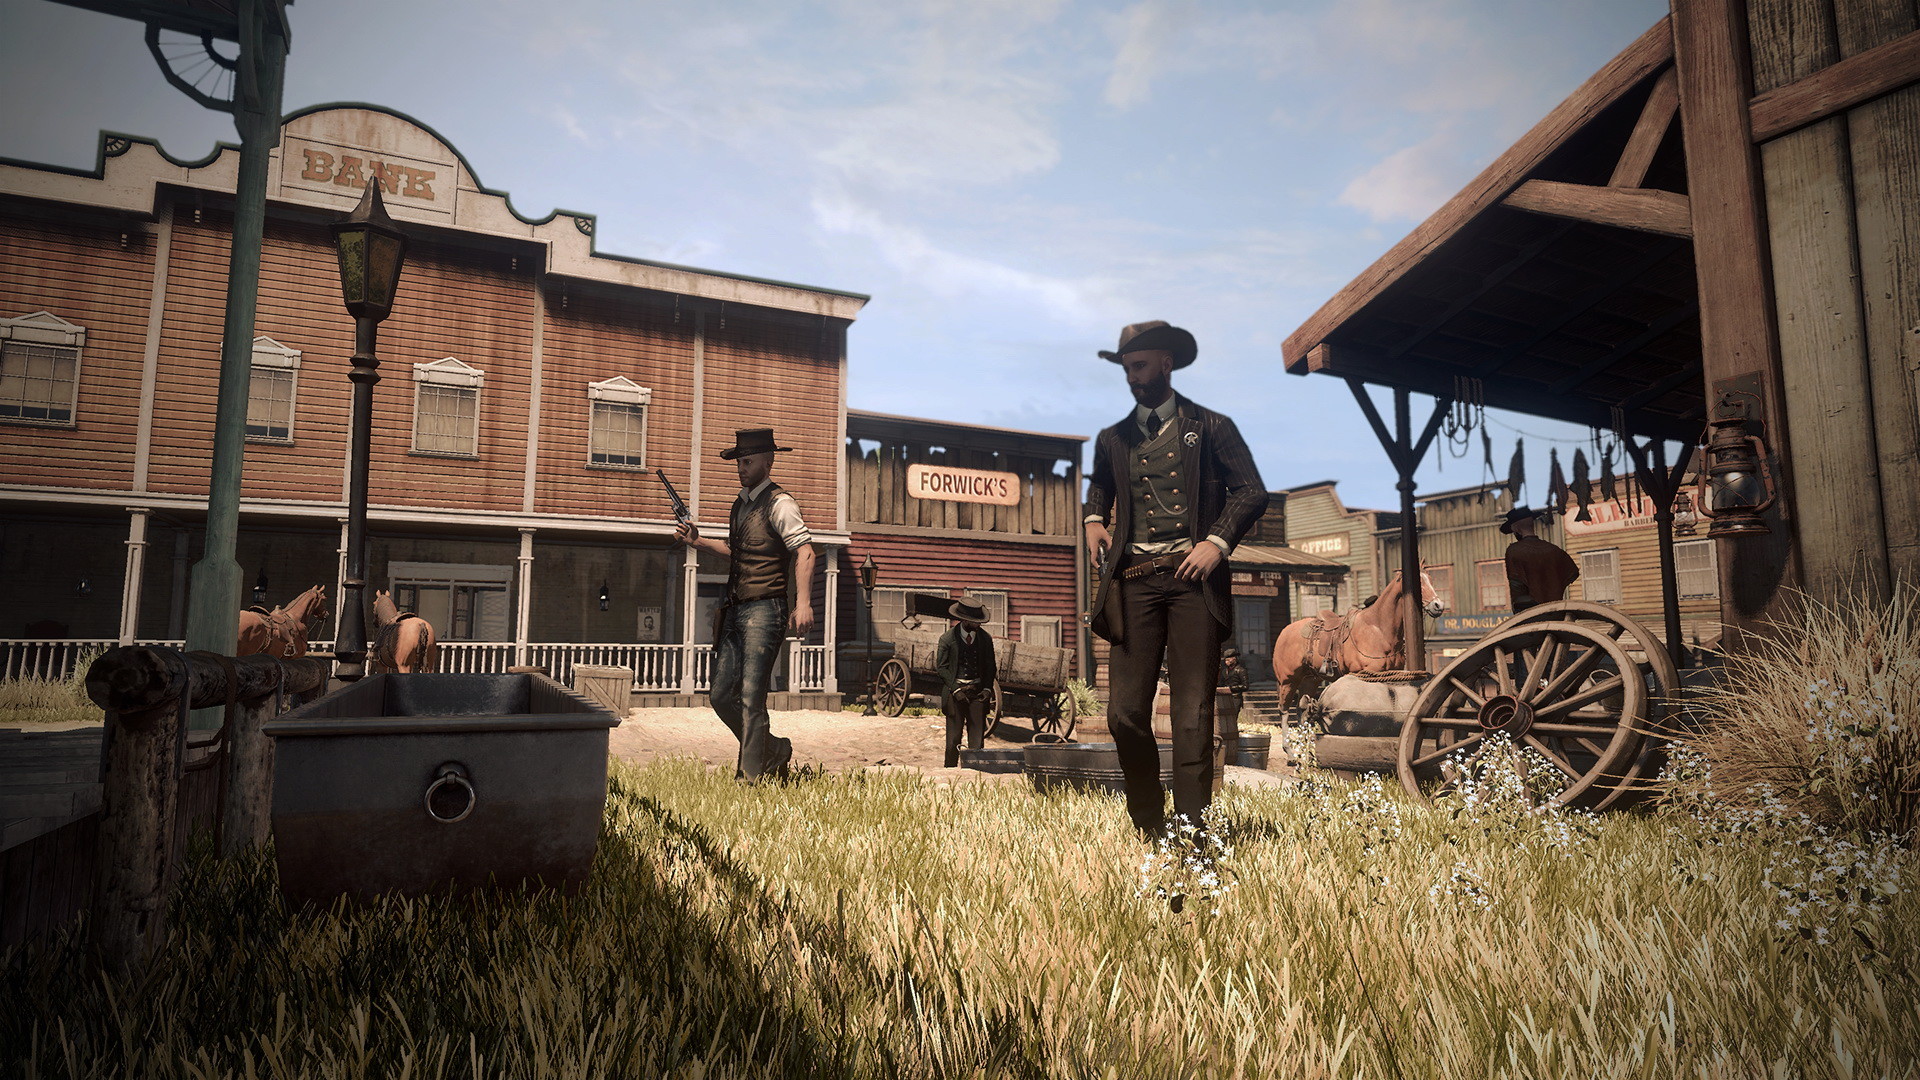 1920x1080 You can change your looks from saloon, hang out with other friends in a bar  and collect the bounty from the sheriffs office. Download Wild West Online  PC ...